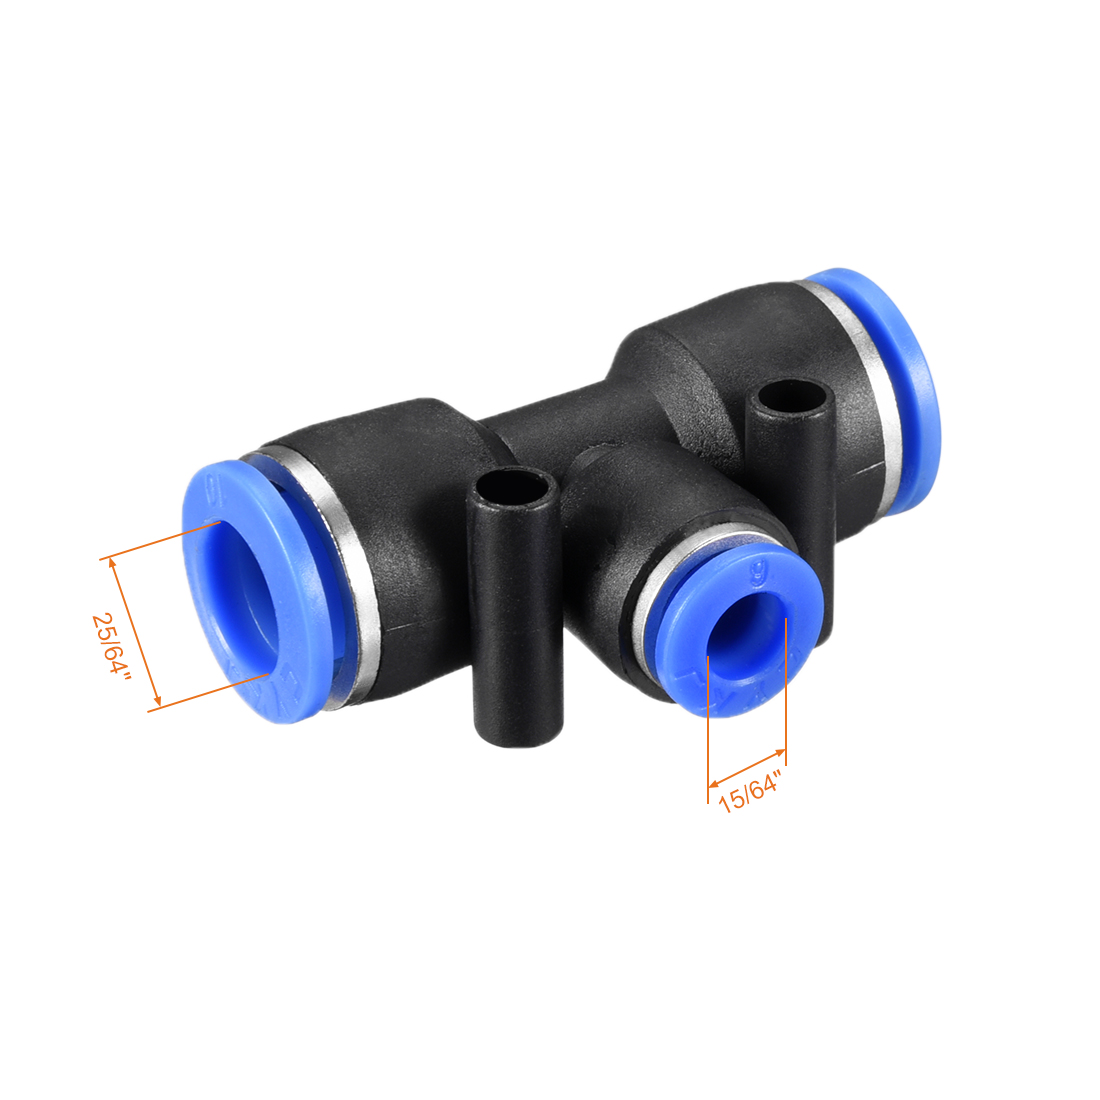 Unique Bargains 10pcs Push to Connect Fittings T Type 25/64“ -15/64” od Tube Fittings Blue